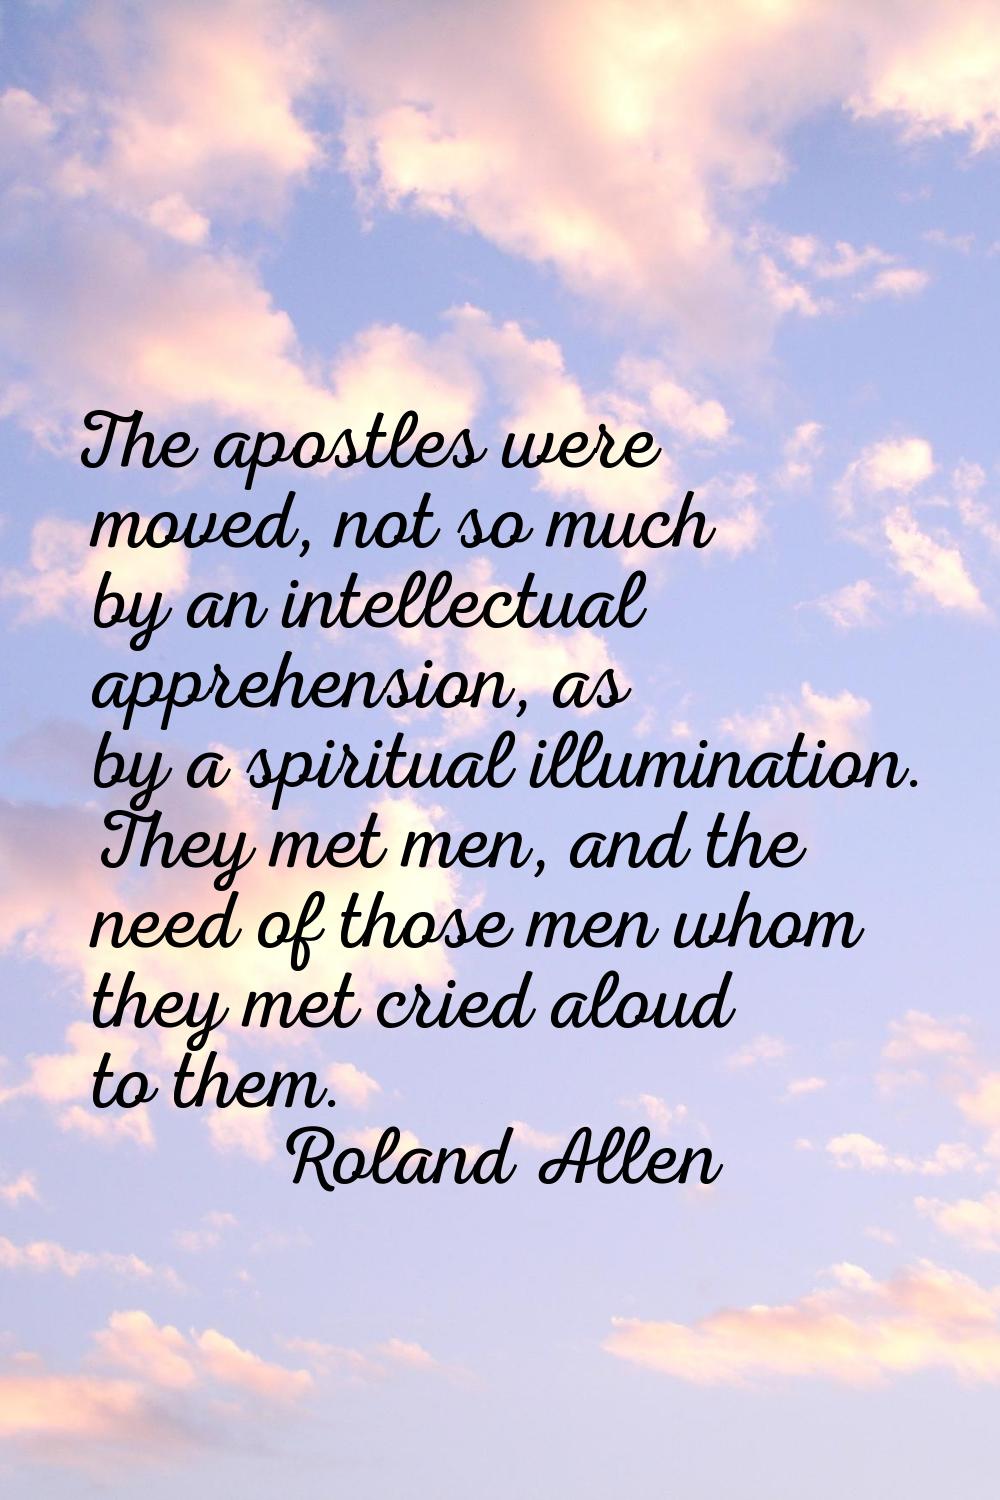 The apostles were moved, not so much by an intellectual apprehension, as by a spiritual illuminatio